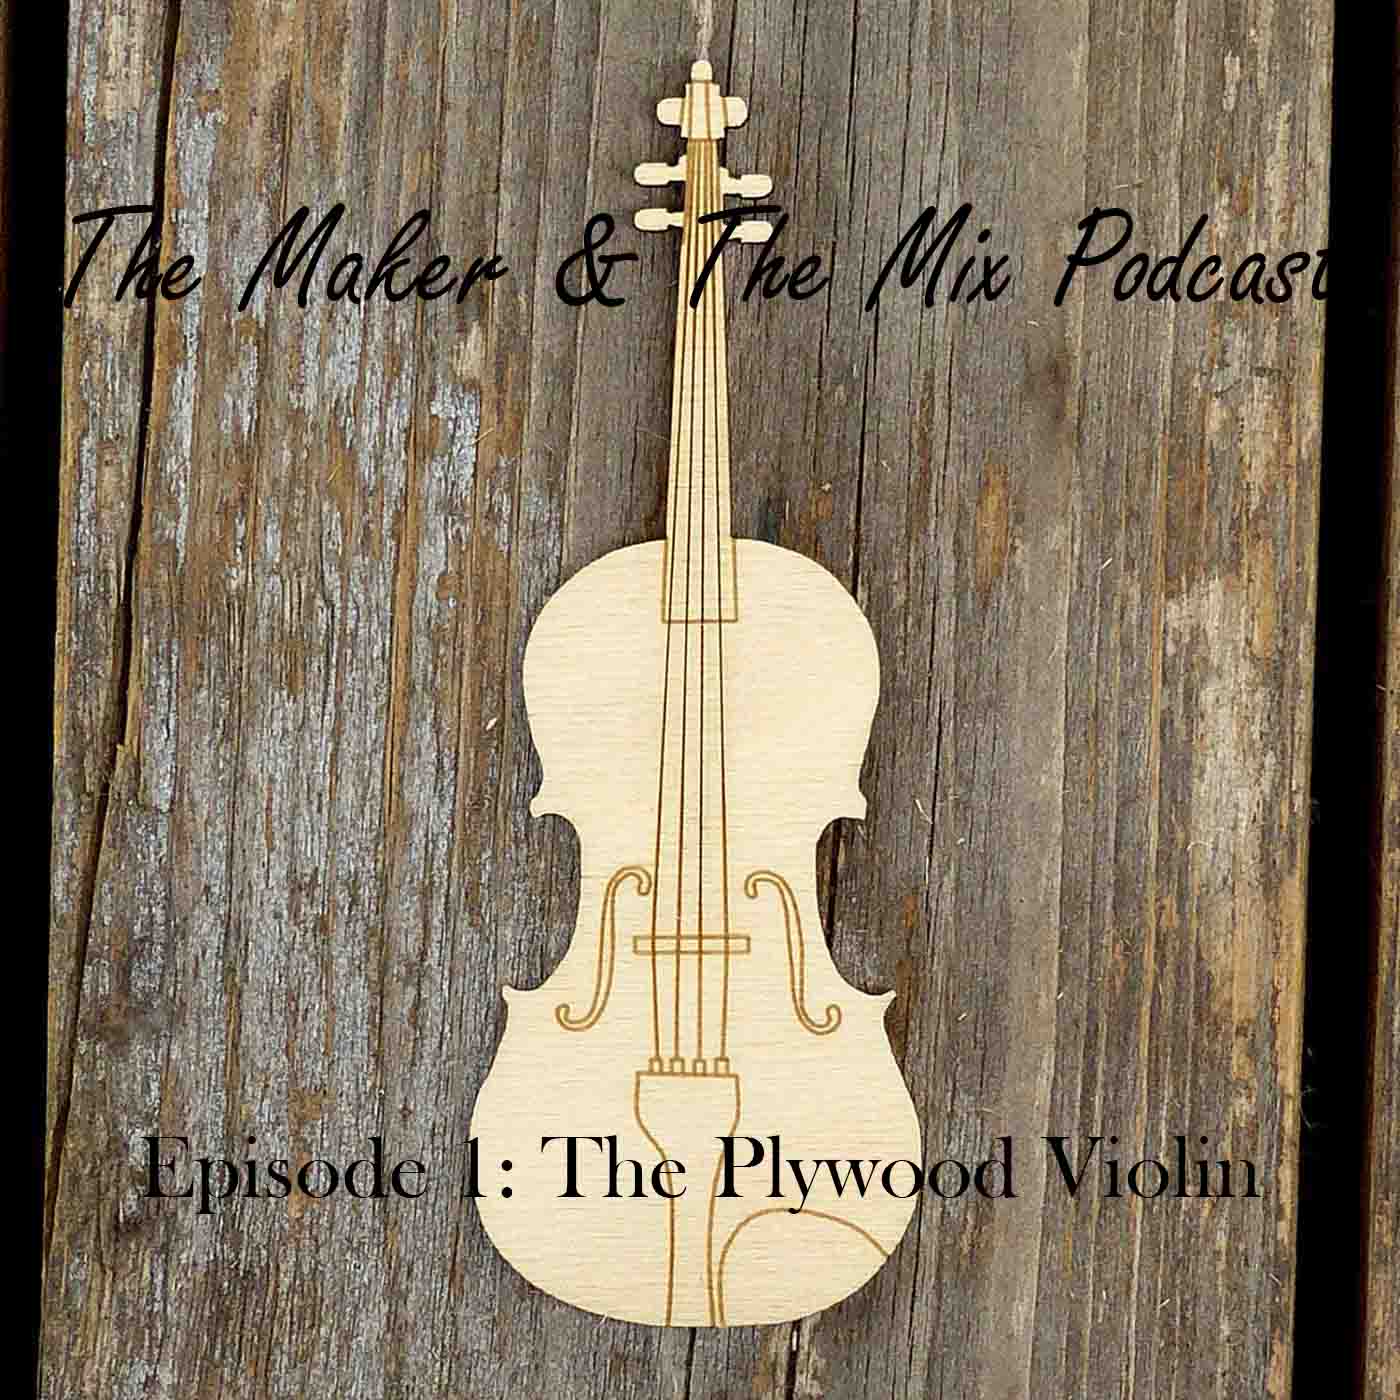 Welcome to The Maker & The Mix. This week: Plywood Violin